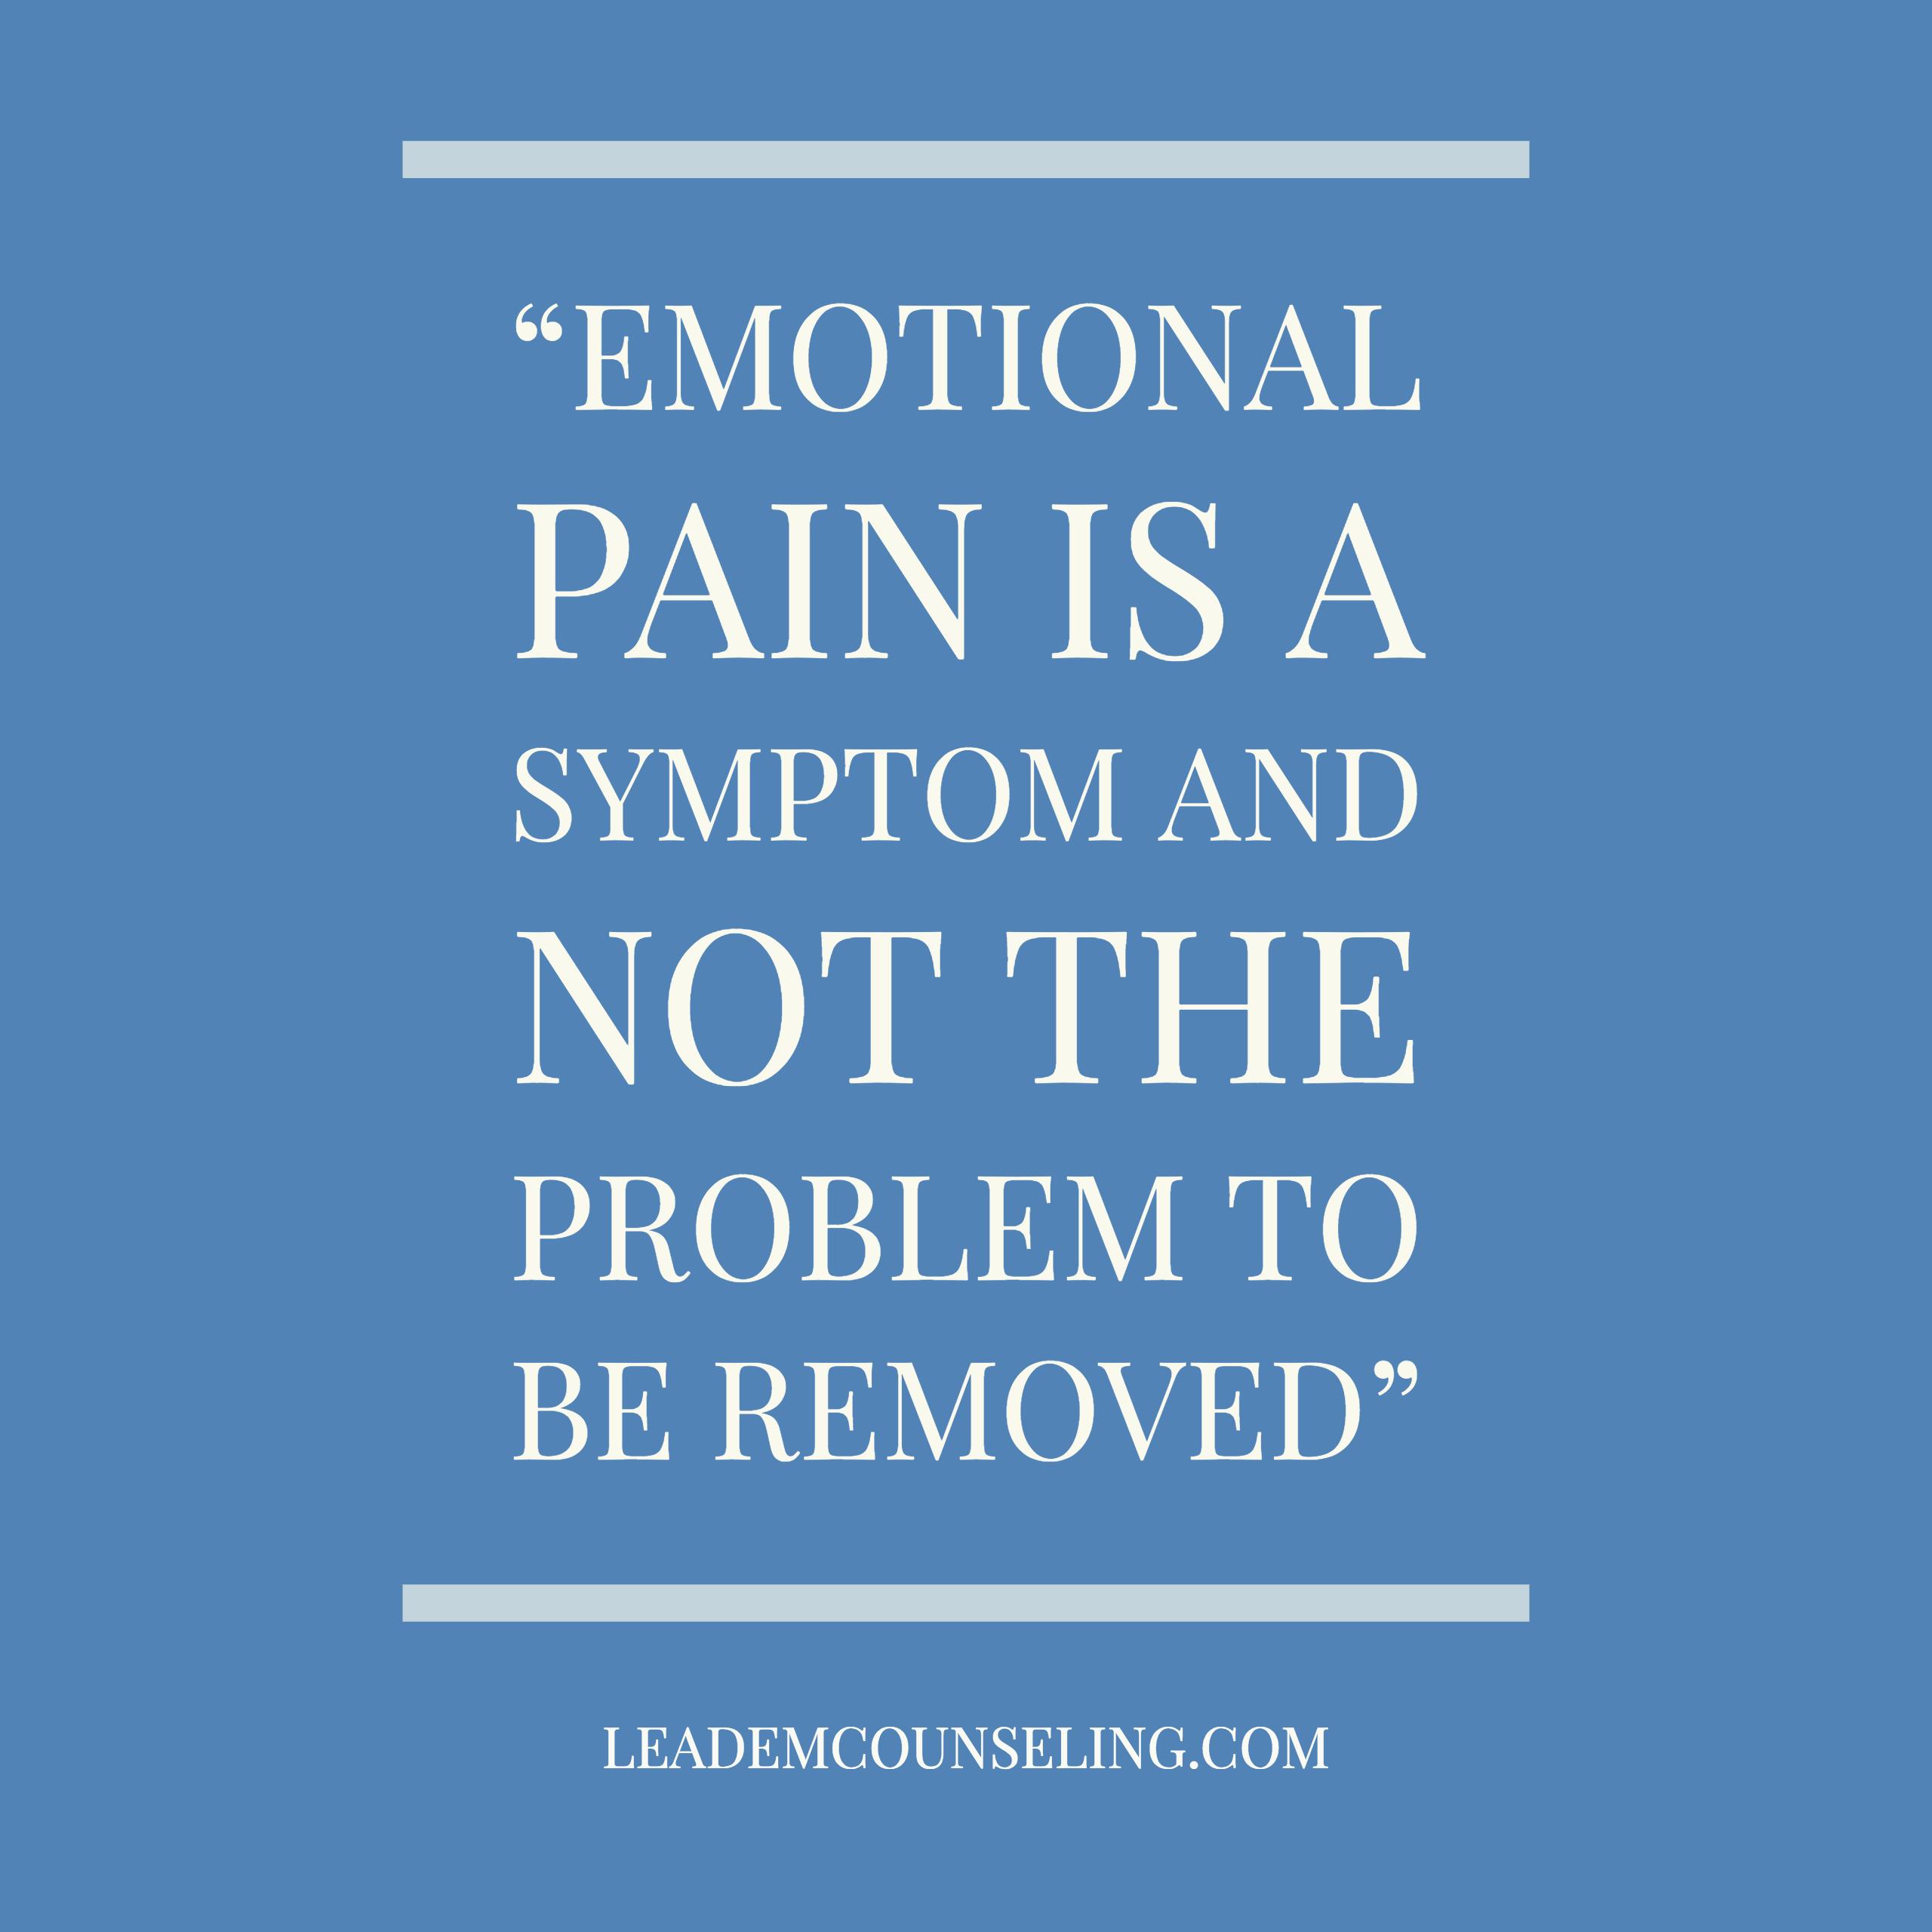 Emotional pain is a symptom and not the problem to be removed